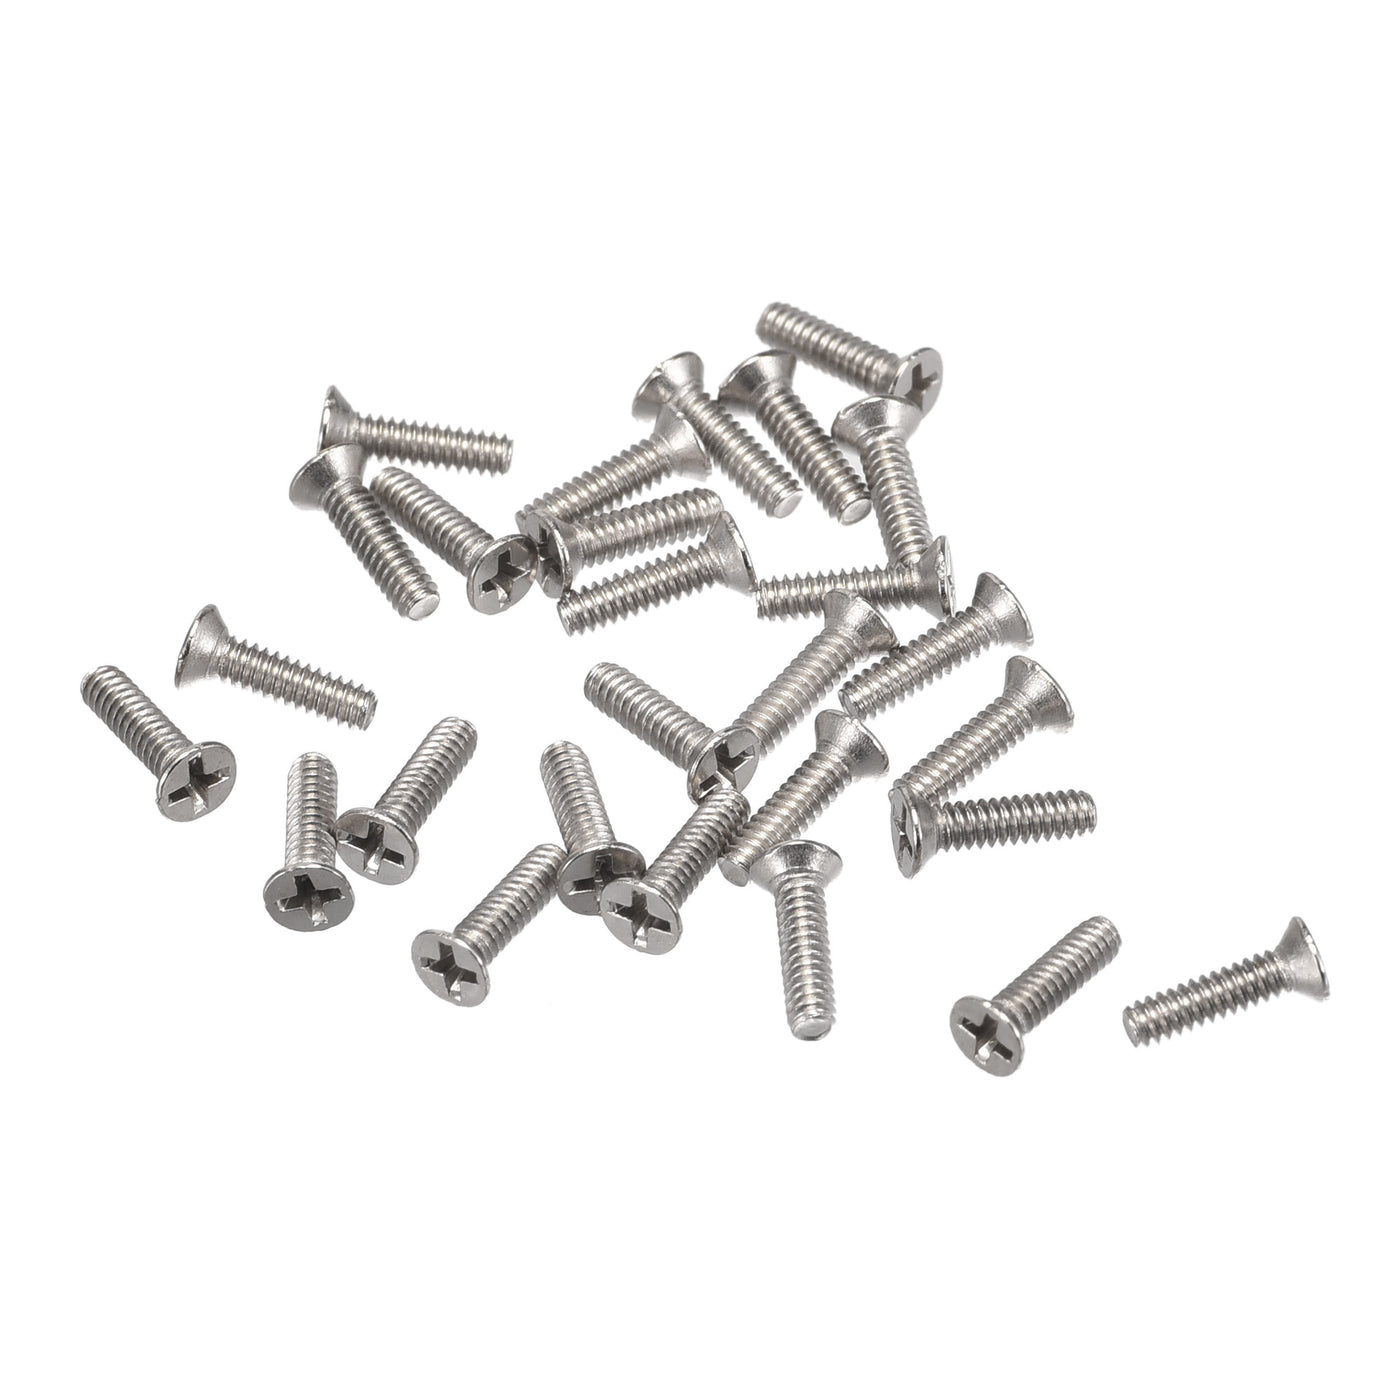 uxcell Uxcell M1.6 x 6mm Tiny Screws Phillips Flat Head Screws Carbon Steel Machine Screws for Glasses Spectacles Watch and Other Small Electronics 350pcs